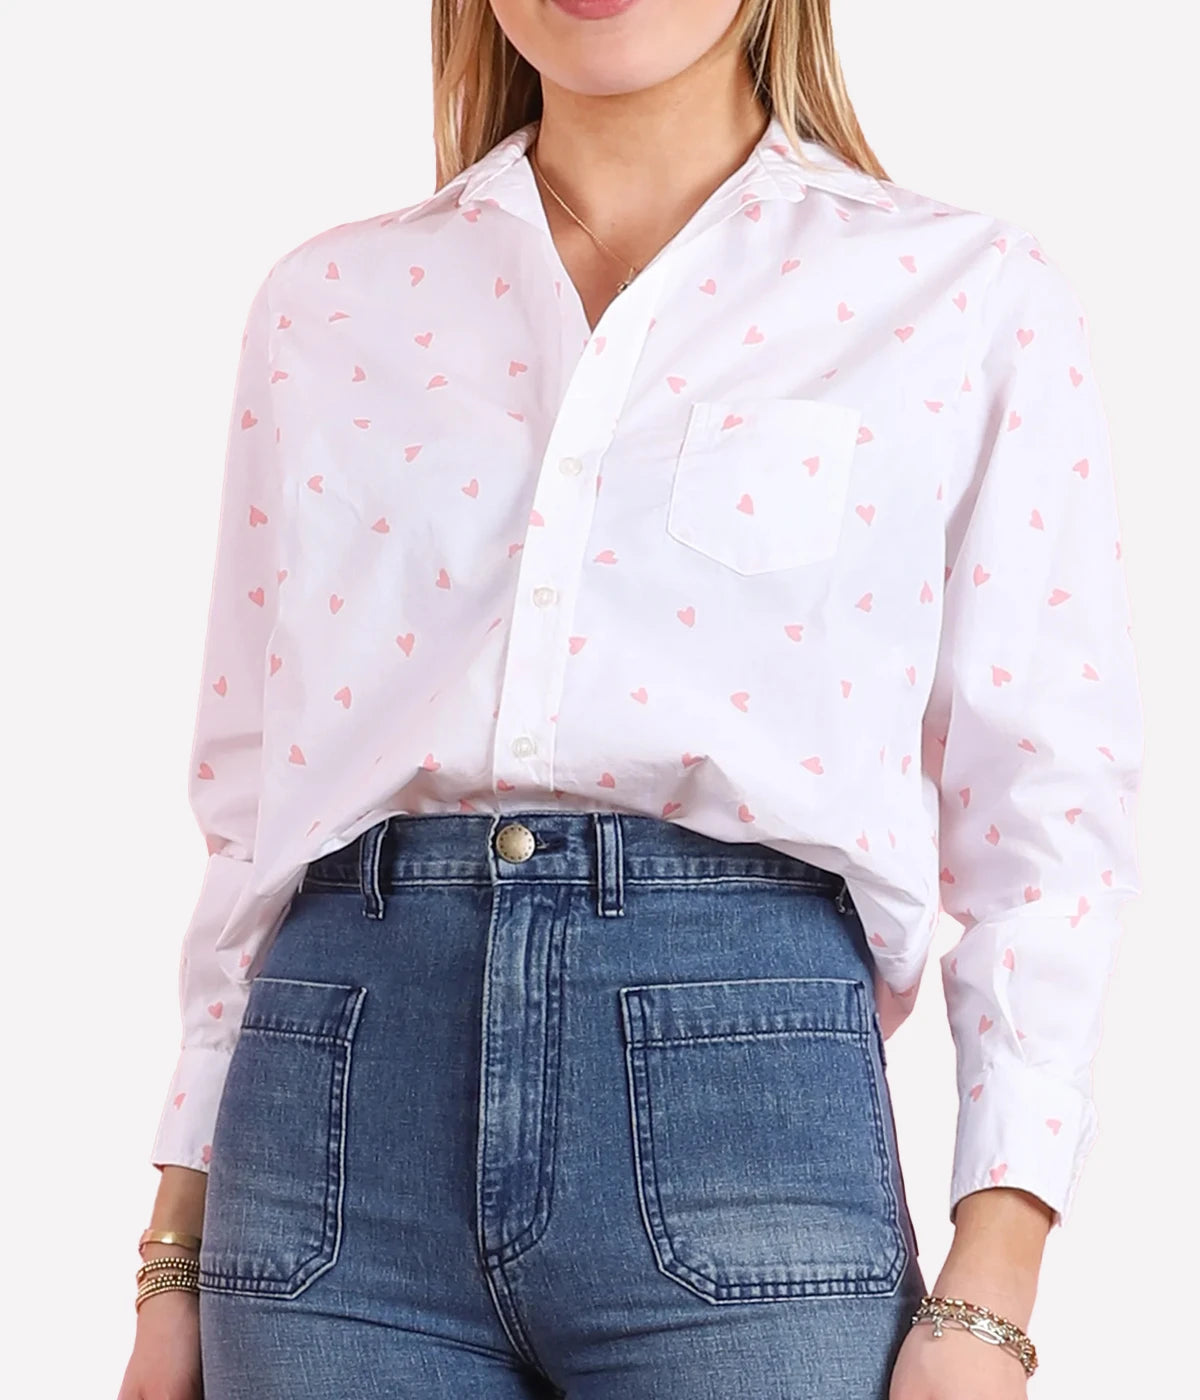 Eileen Relaxed Button Up Shirt in Pink Messy Hearts Cotton